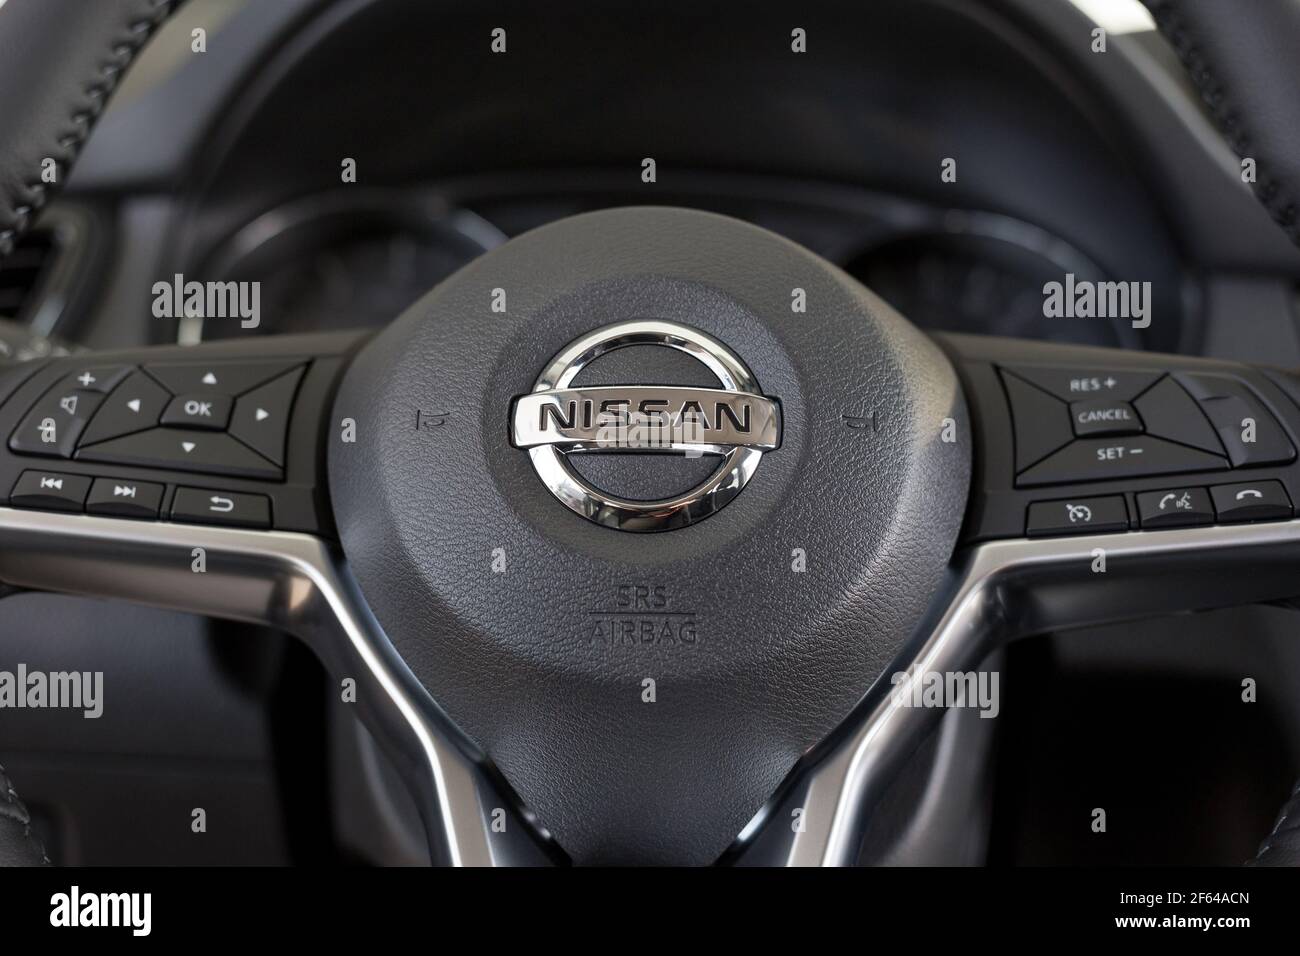 Russia, Izhevsk - February 19, 2021: Nissan showroom. Steering wheel of new Qashqai car with leather cover. Famous world brand. Stock Photo